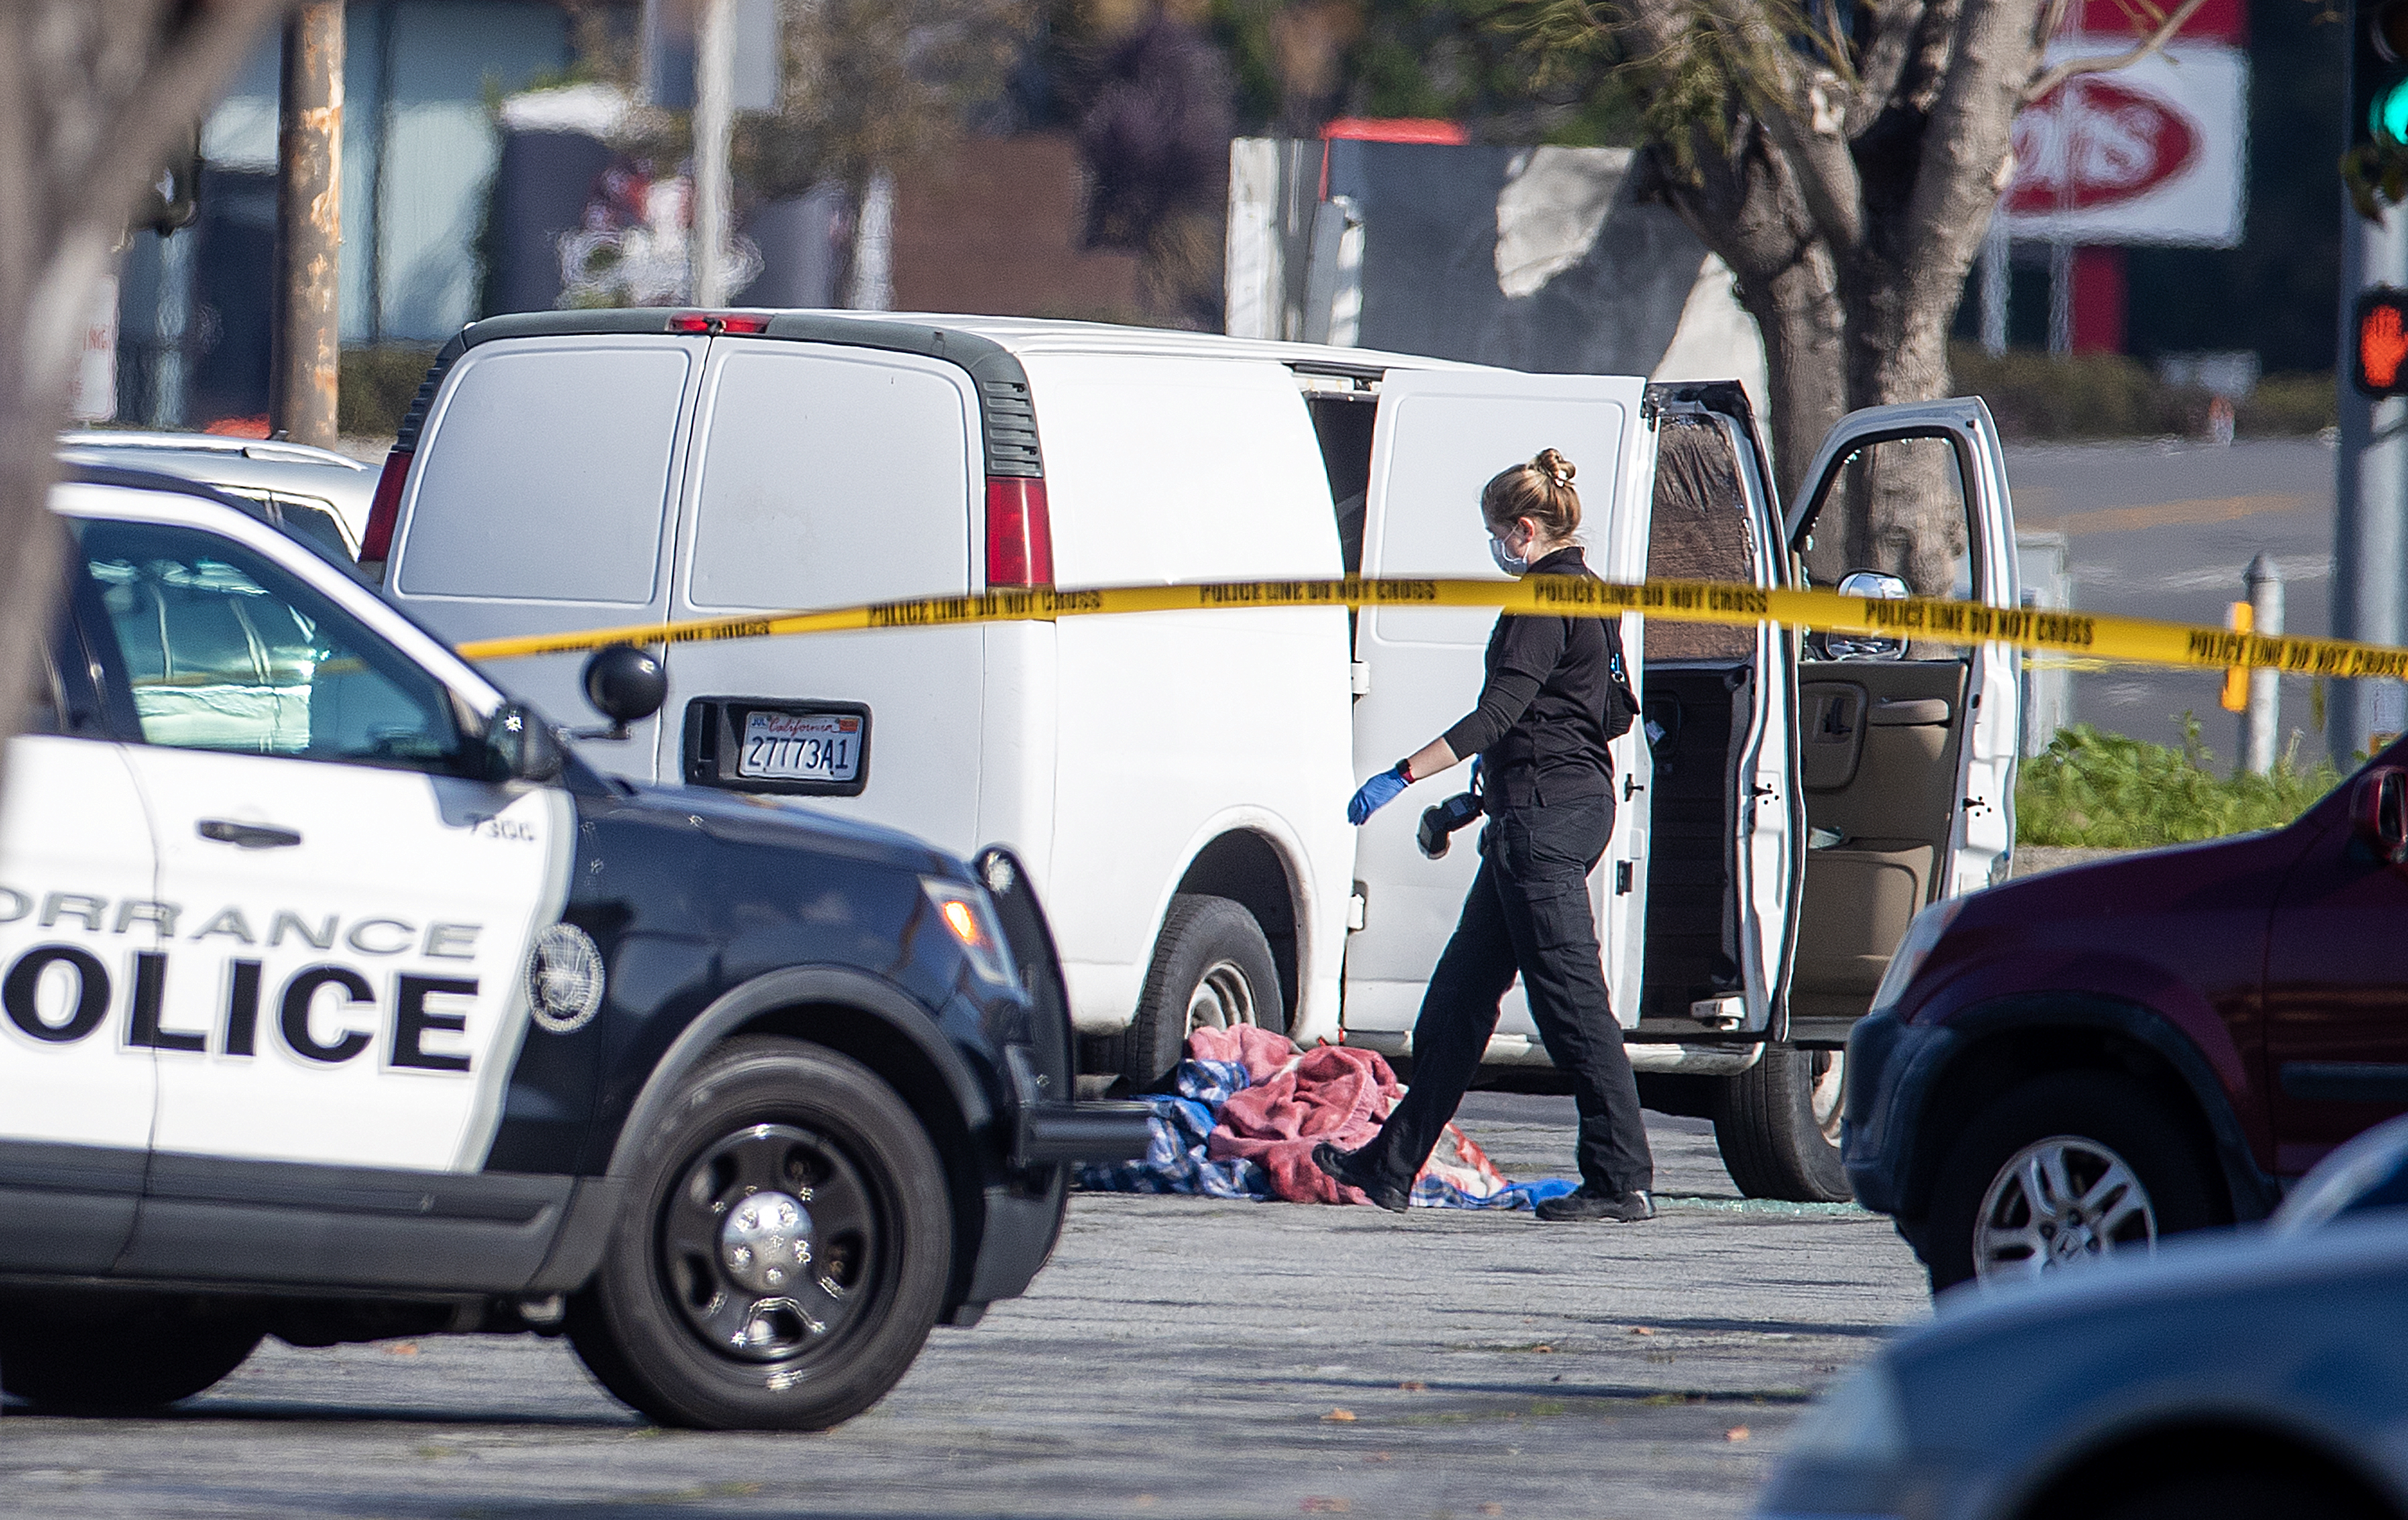 A coroner official investigates the scene of a van believed to be tied to the Monterey Park ballroom shooting on Sunday.